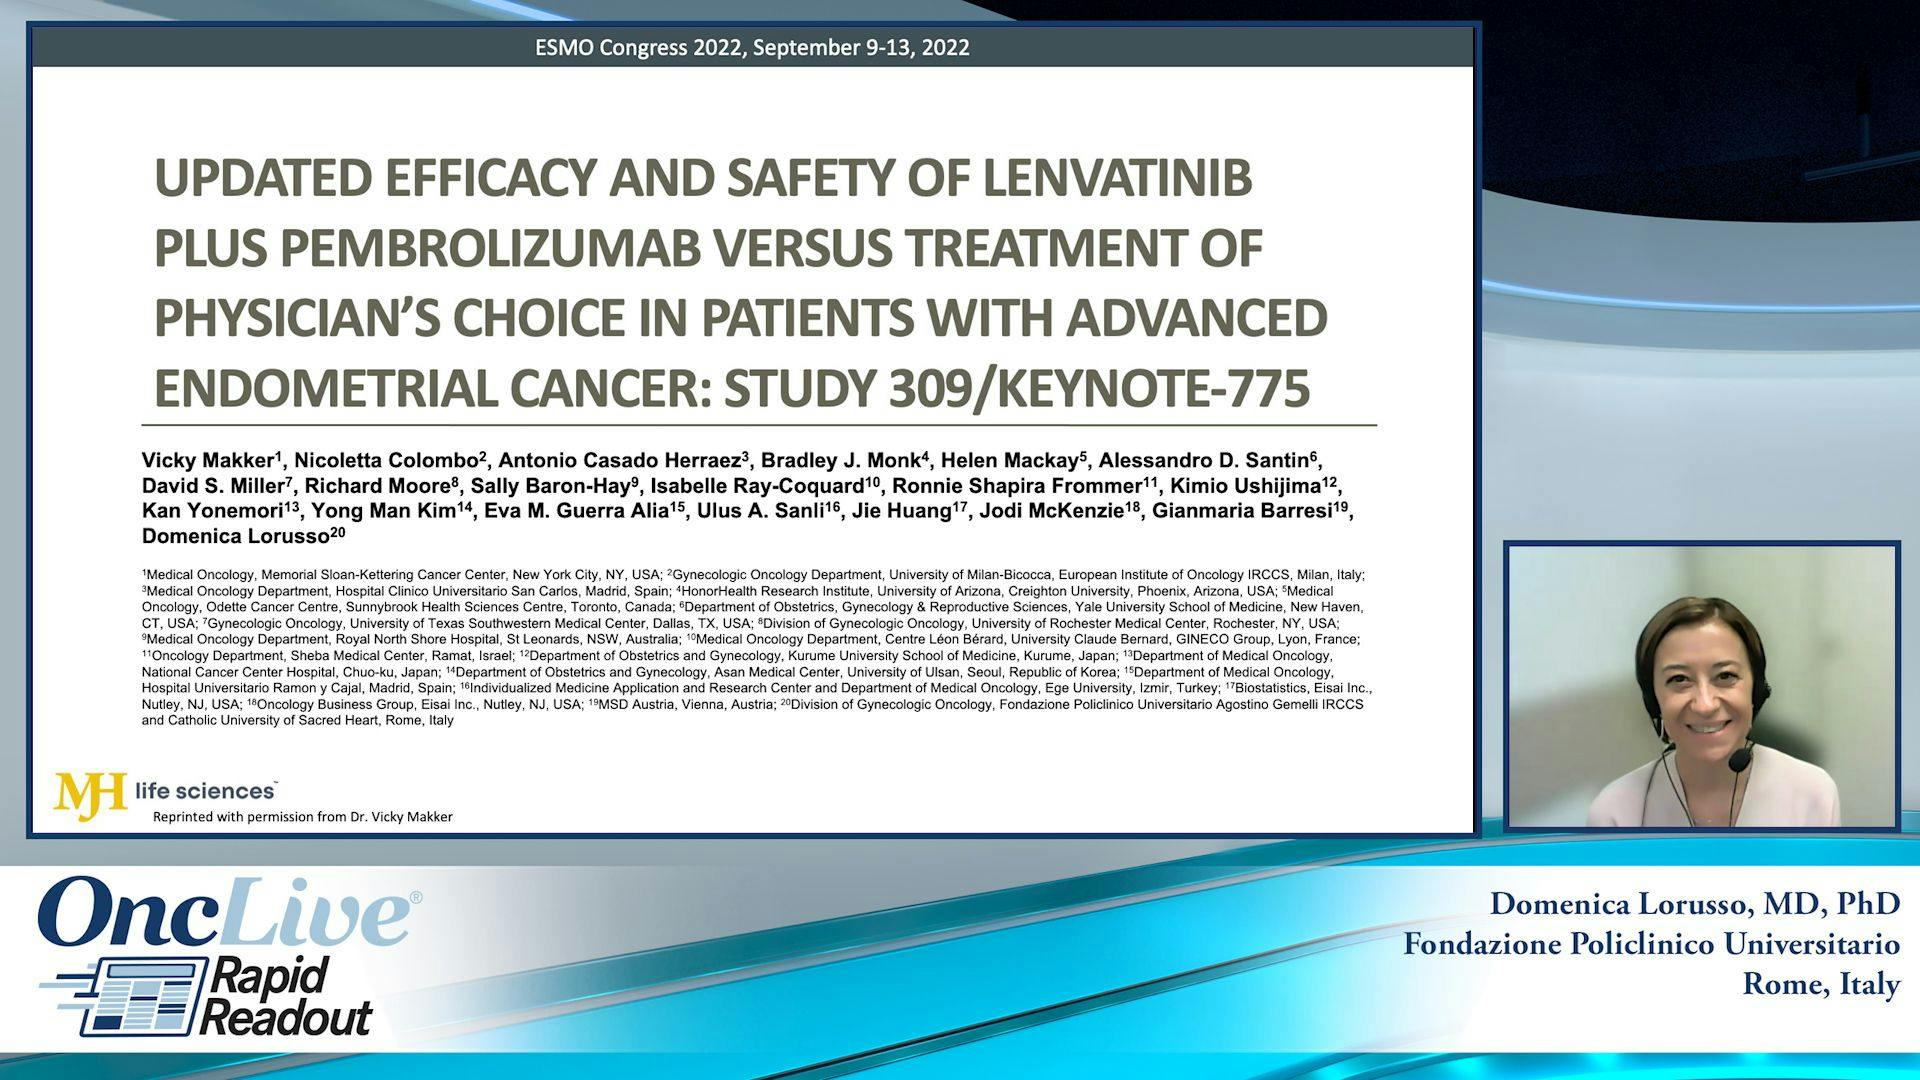 Updated Efficacy and Safety of Lenvatinib Plus Pembrolizumab Versus Treatment of Physician’s Choice in Patients With Advanced Endometrial Cancer: Study 309/KEYNOTE-775